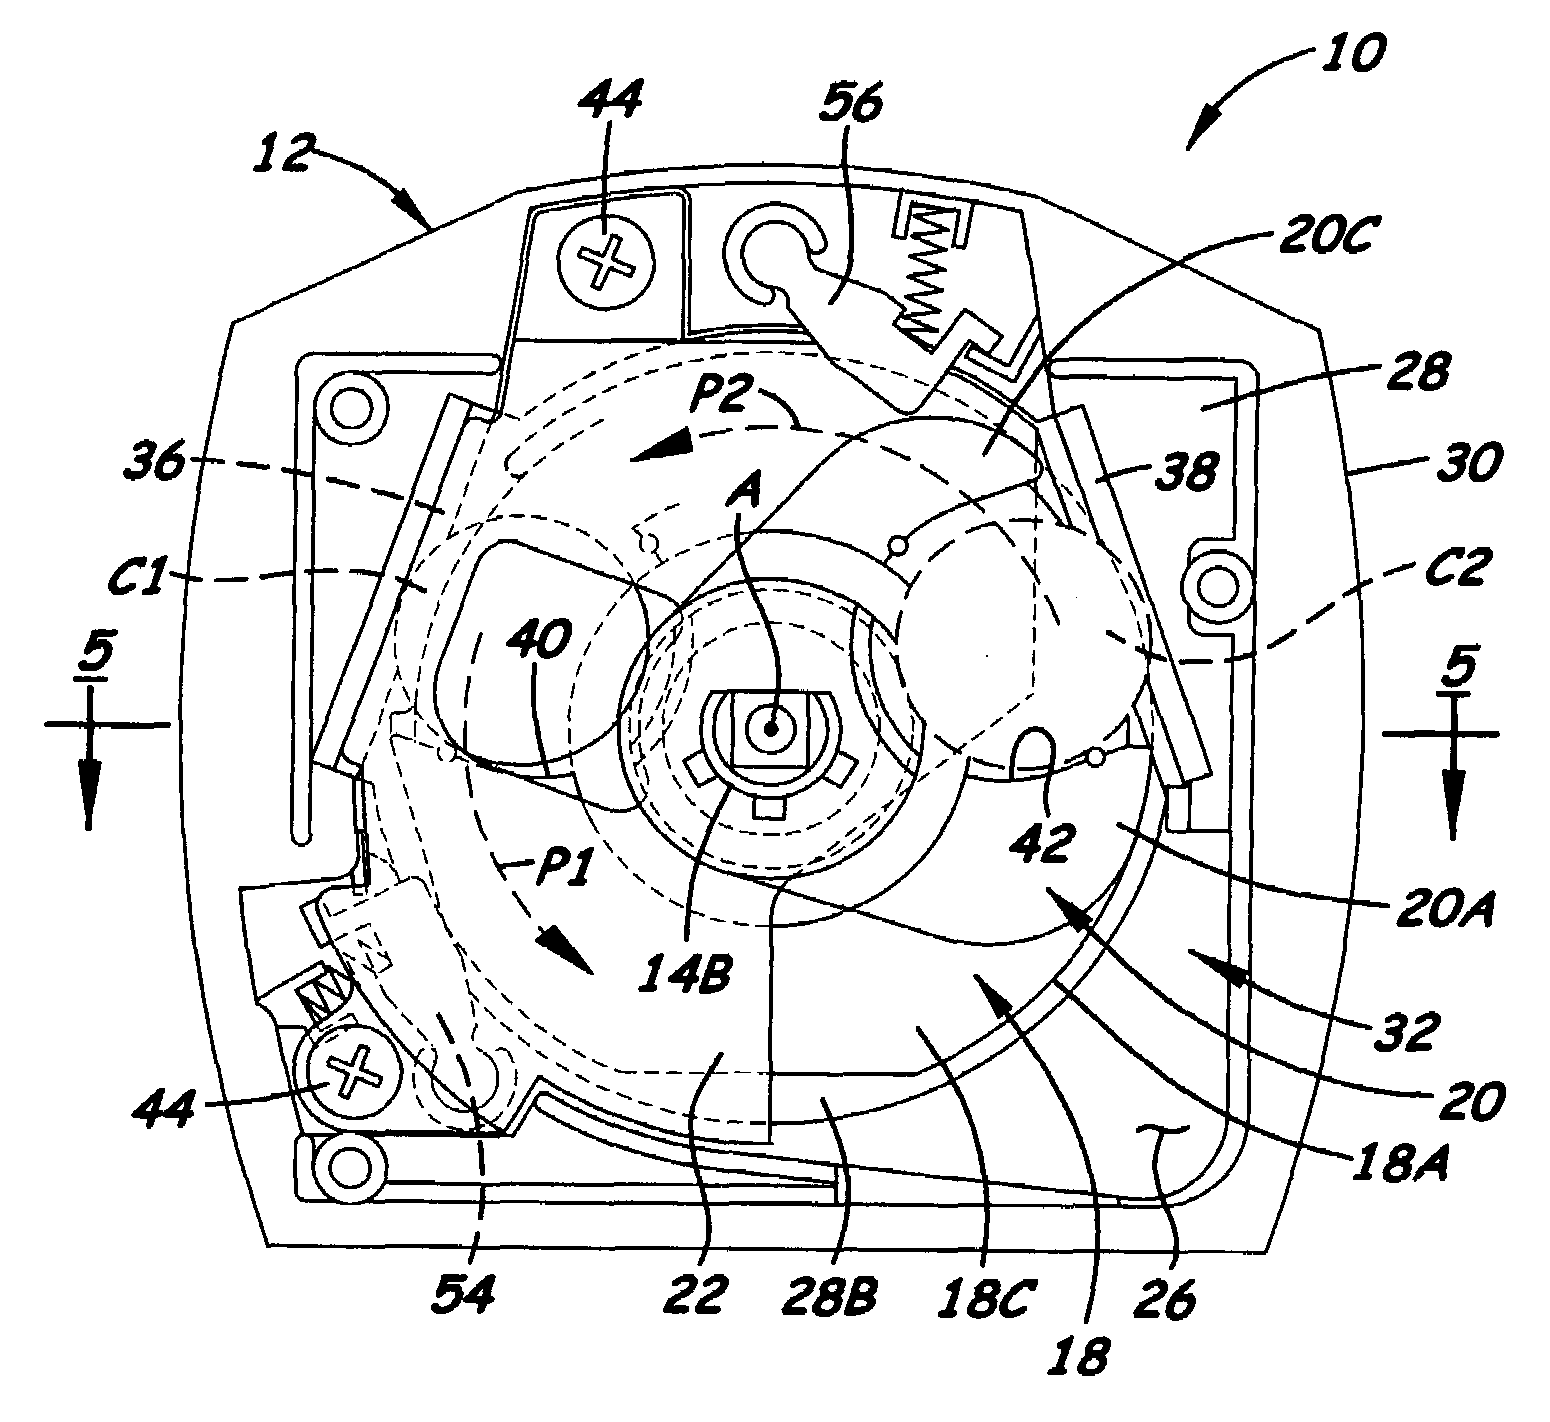 Dual coin actuation mechanism with angularly and axially offset coin slots and recesses